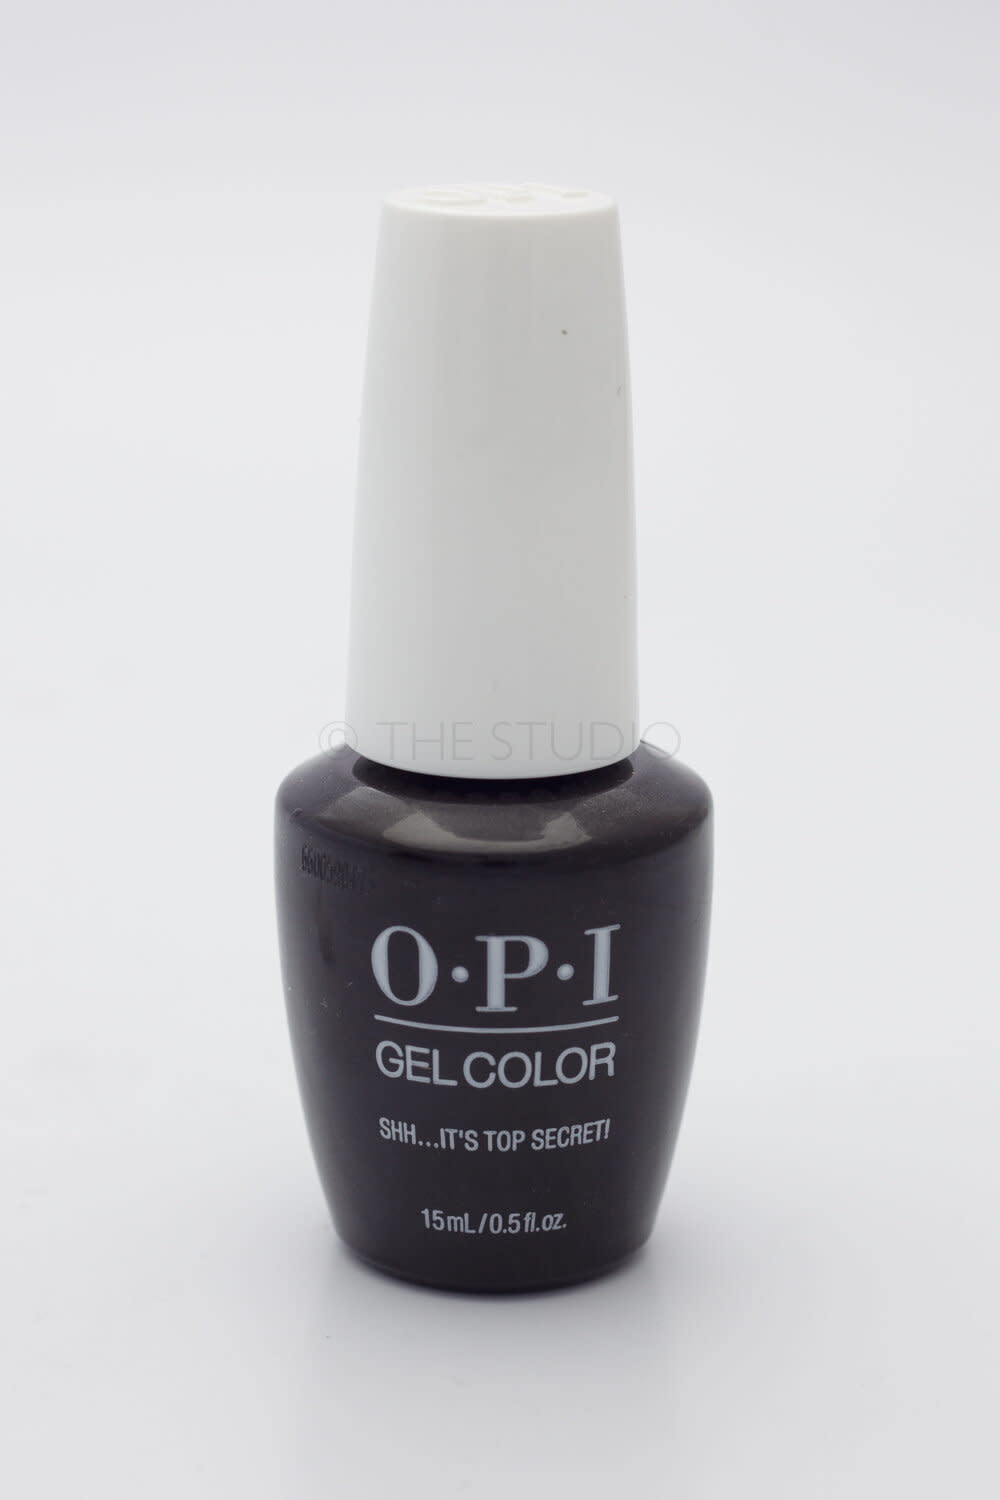 OPI OPI - W61 - Gel - Shh...It's Top Secret! - The Studio - Nail and ...